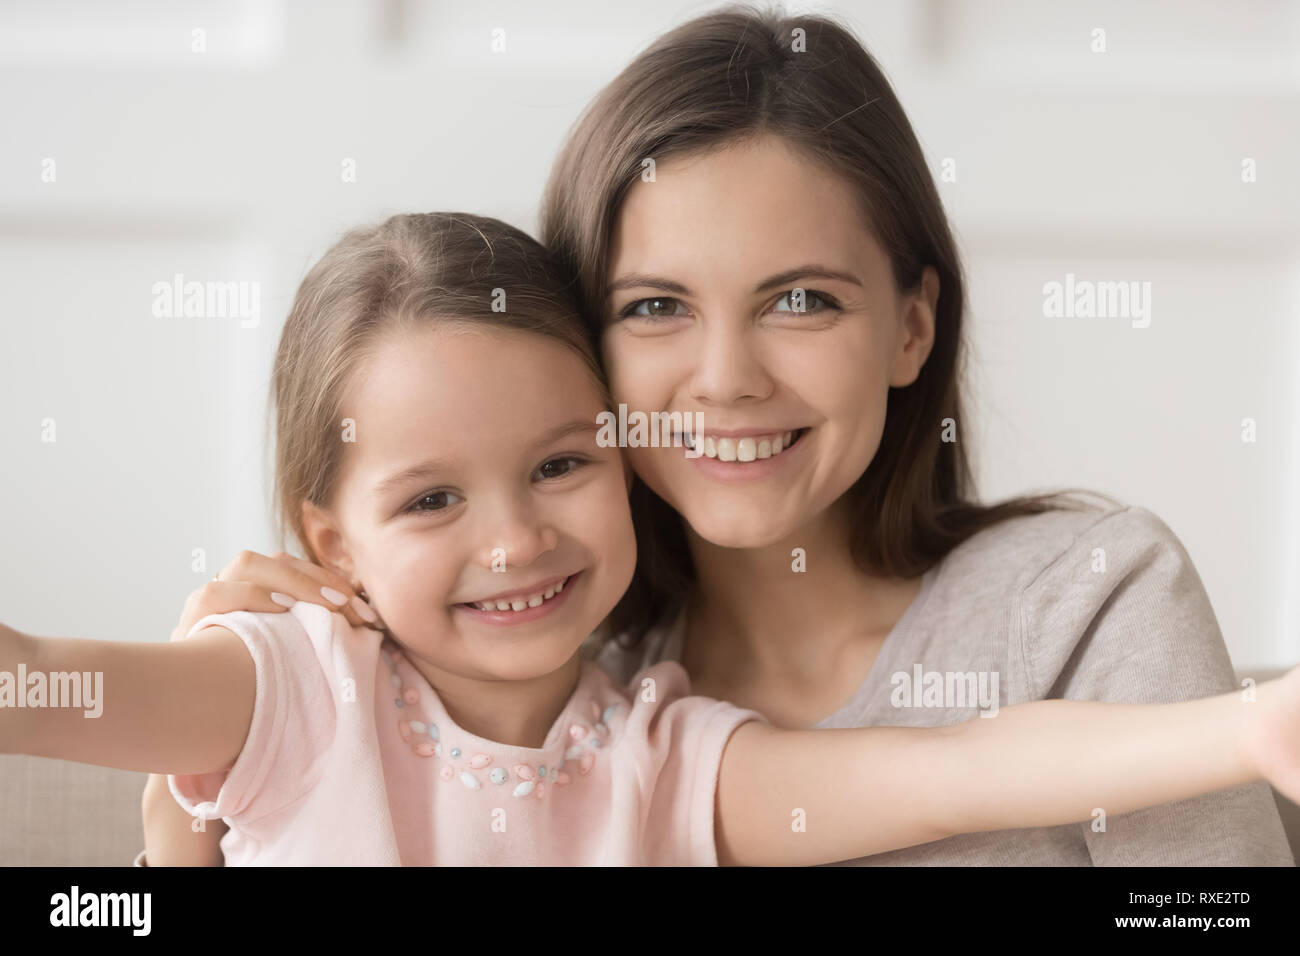 Headshot of happy family mother and kid daughter embracing bonding Stock Photo